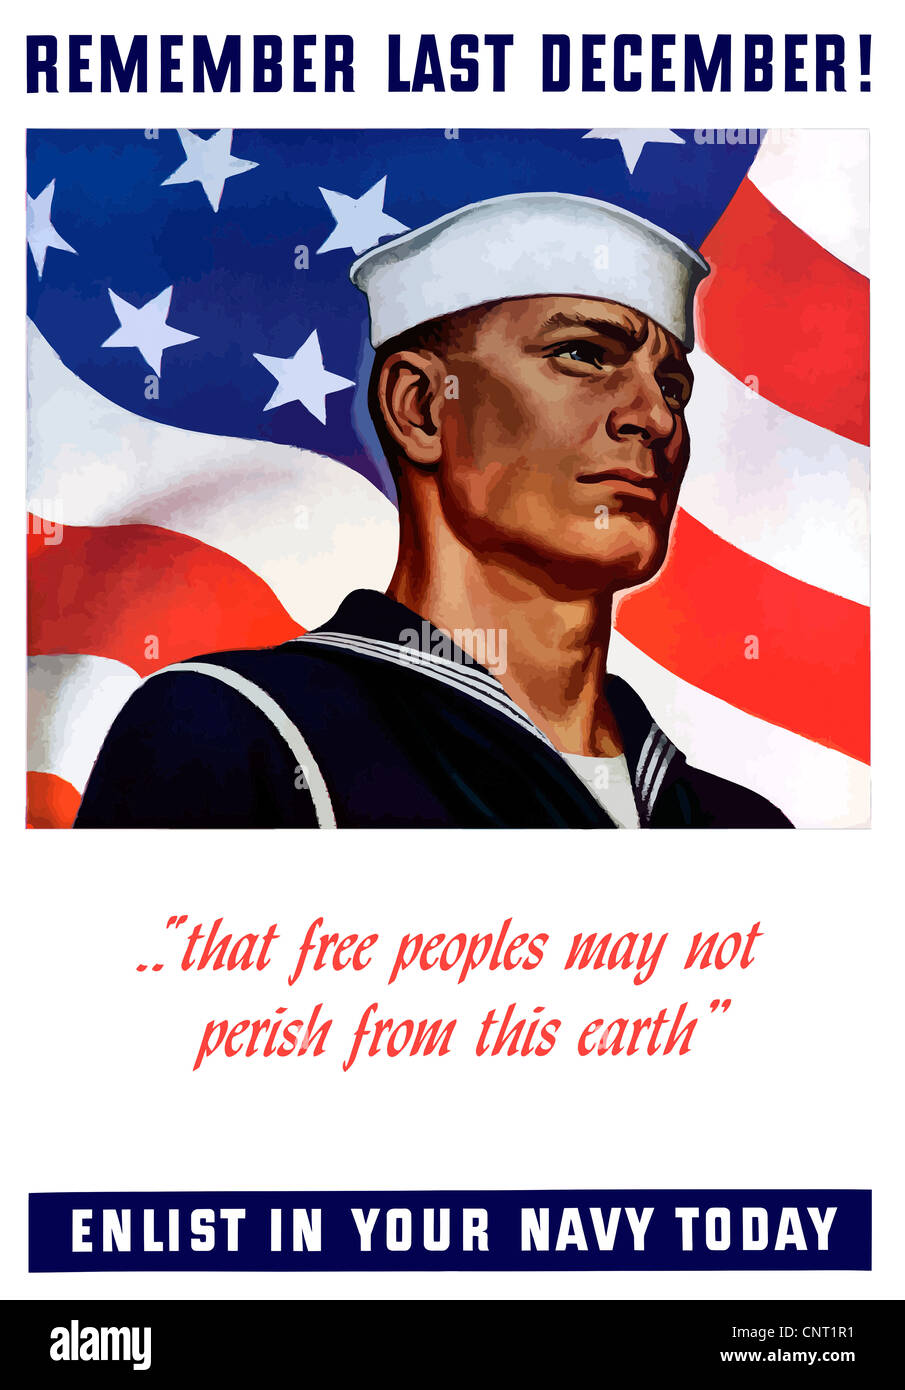 This vintage World War II naval recruiting poster features a proud American sailor in front of the American flag. Stock Photo